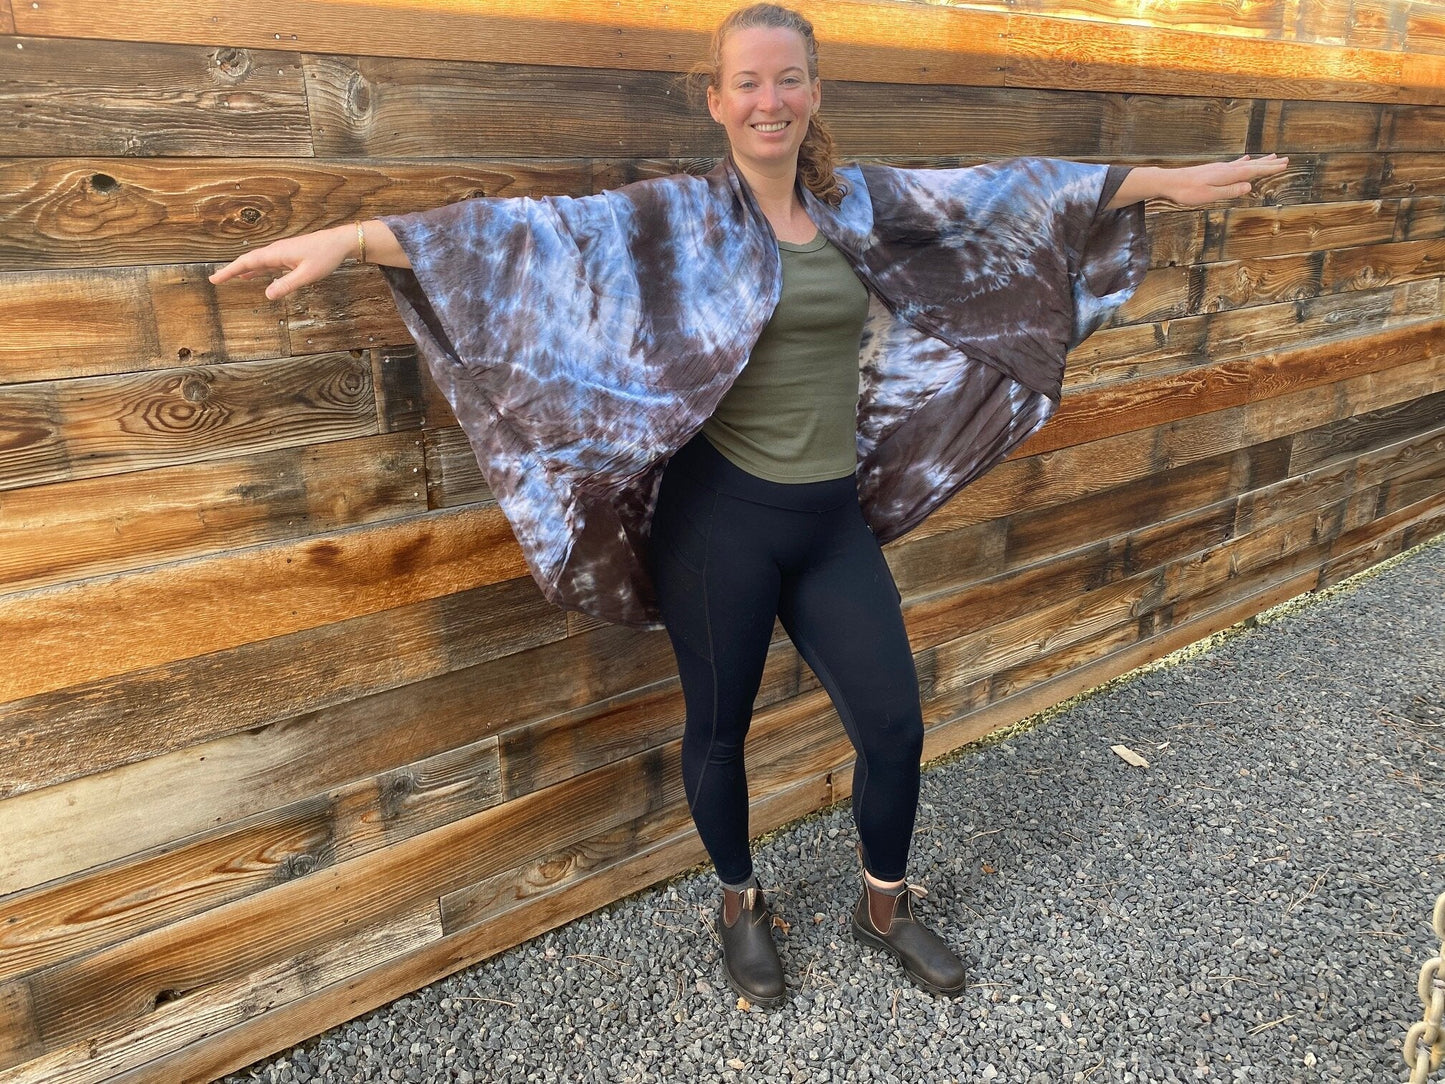 The Gray Day TieDye Scarf and Wrap - The Butterfly Wrap Number 8 - Tie Dye Sustainable Rayon Wrap by 1 Life